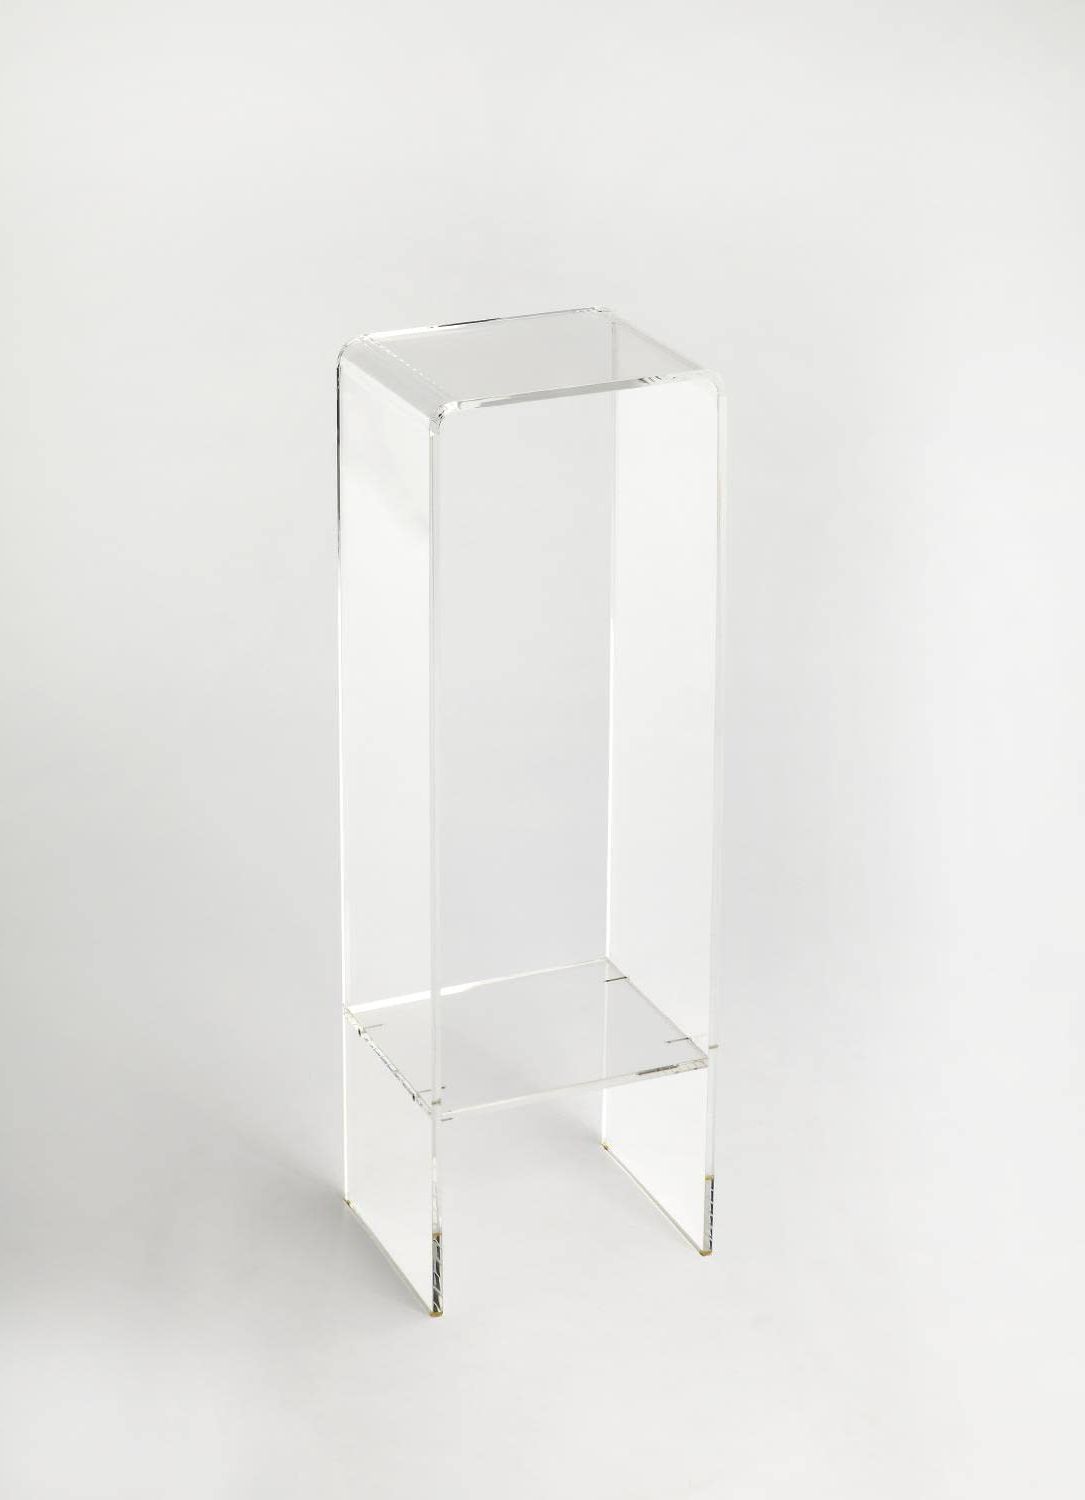 Most Up To Date Acrylic Plant Stands In Amazon: Butler Crystal Clear Acrylic Plant Stand : Patio, Lawn & Garden (View 1 of 10)